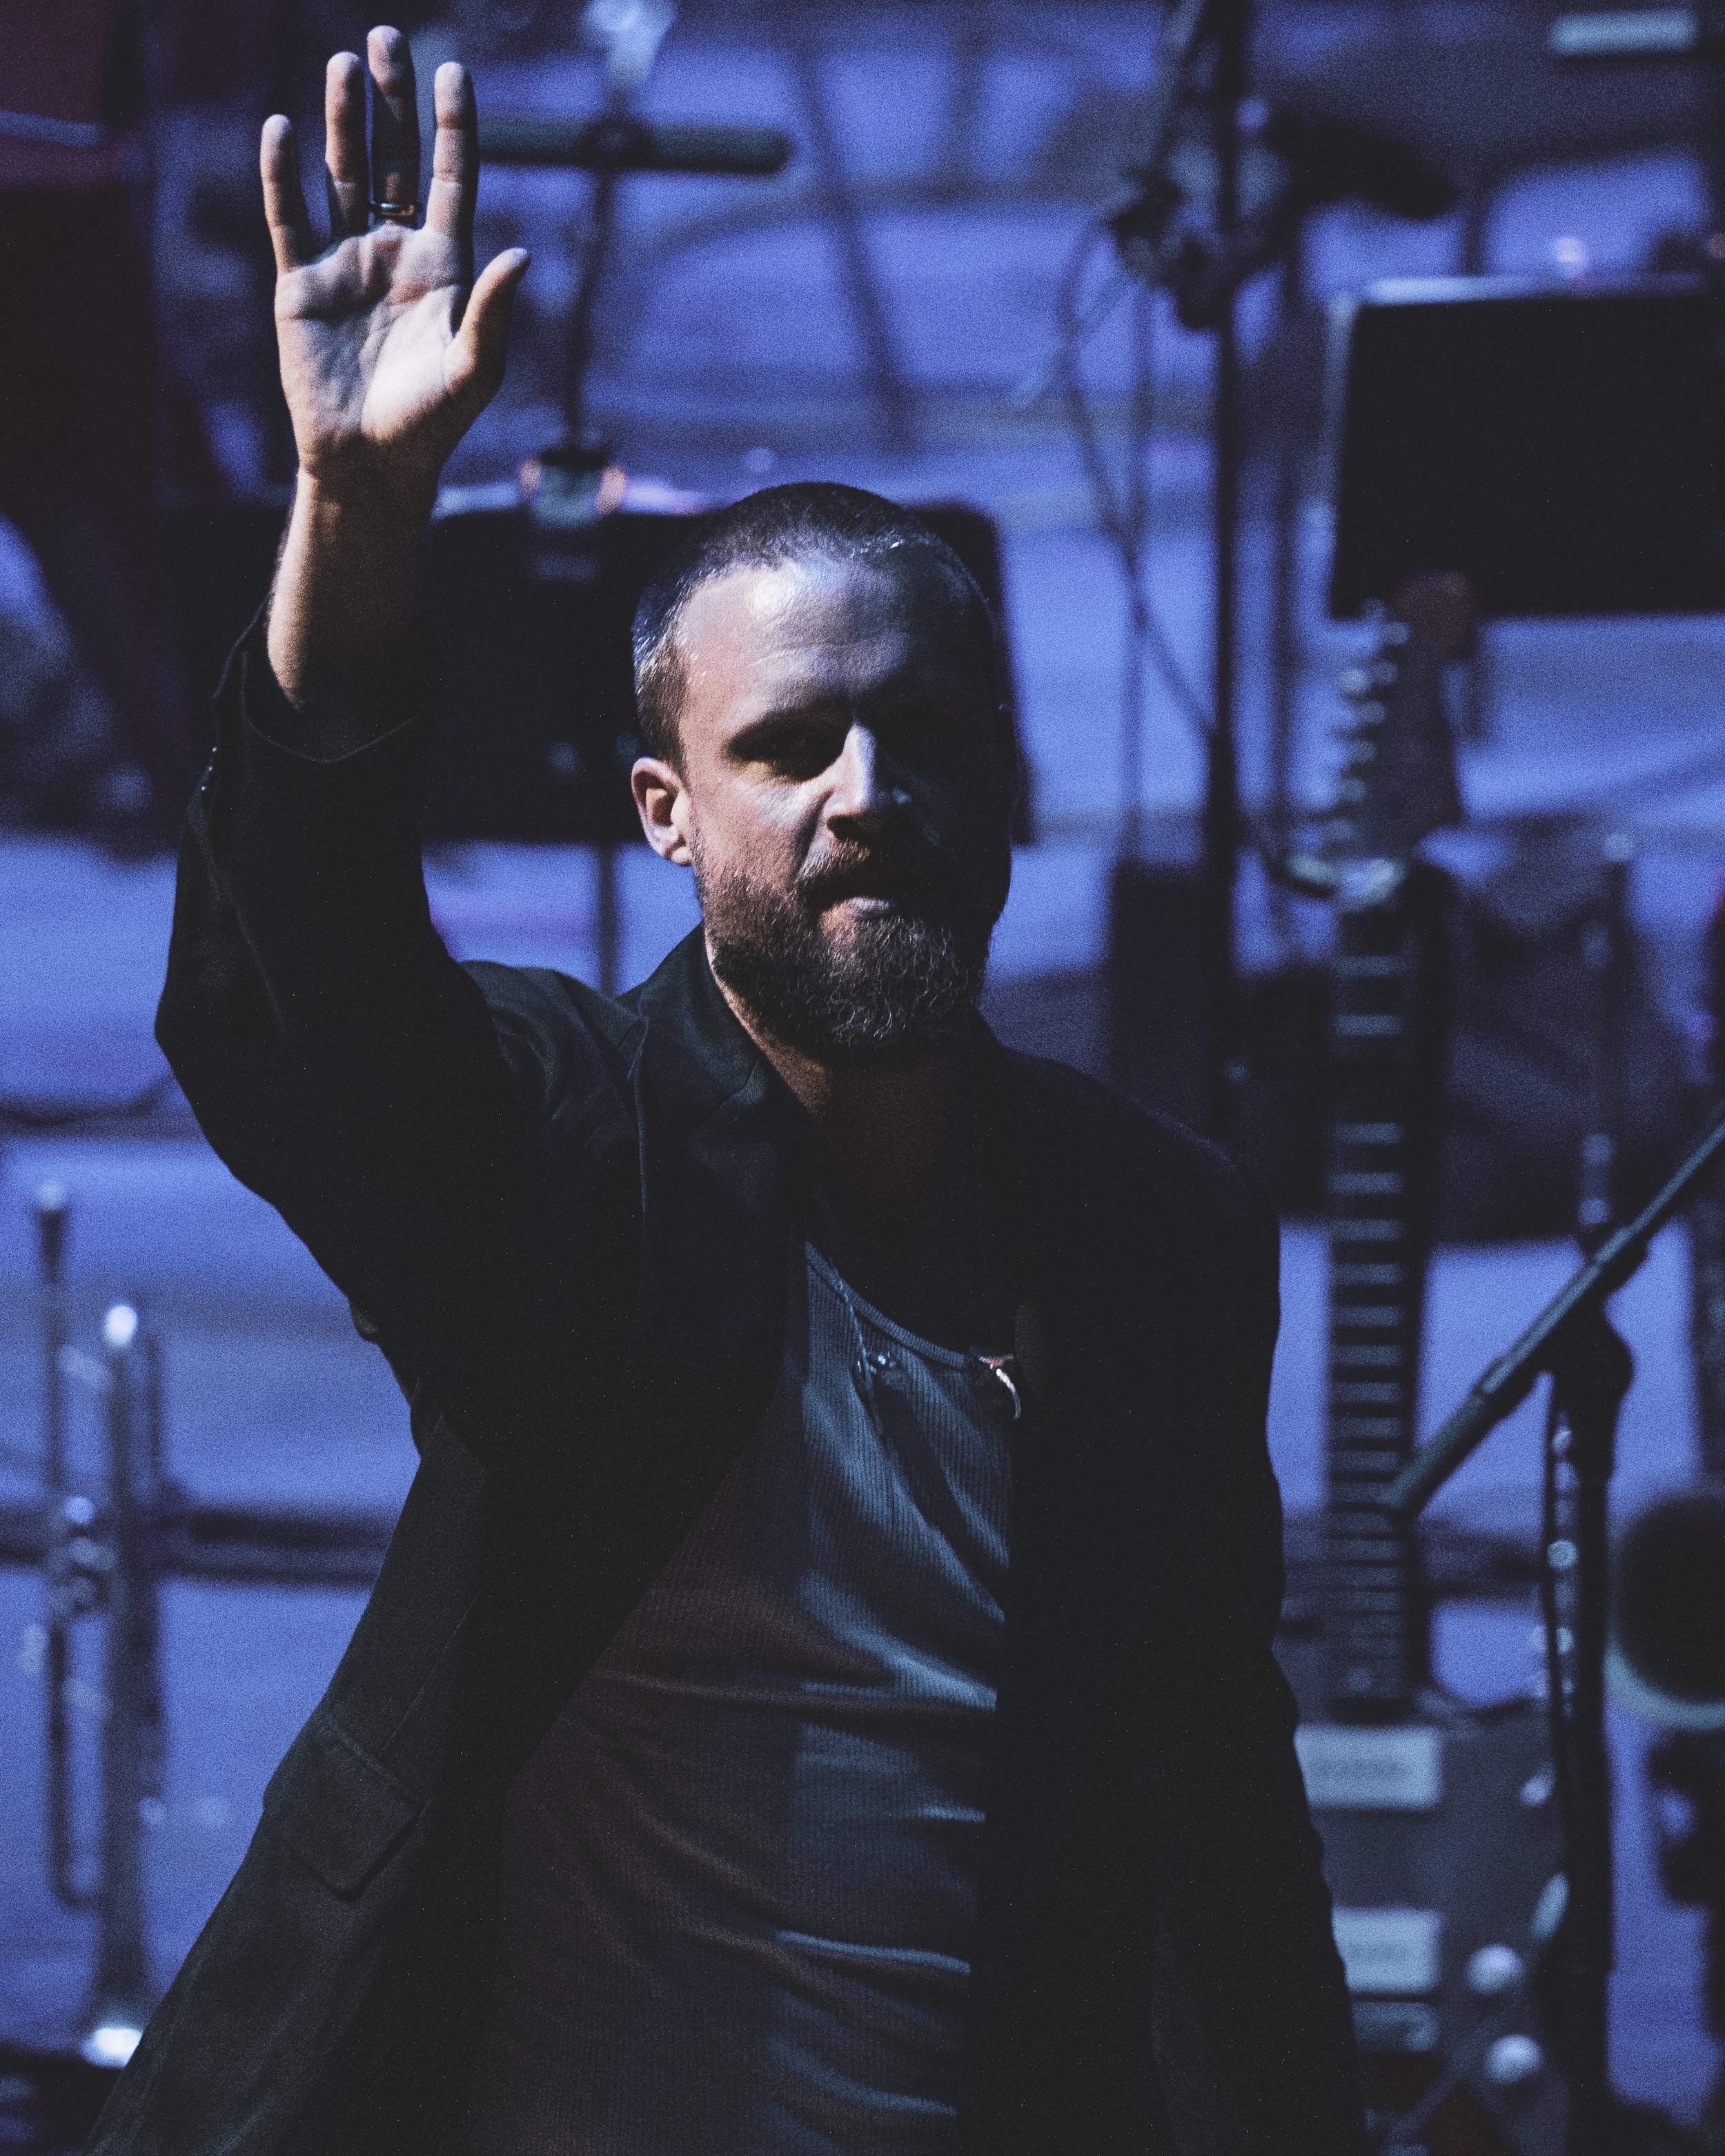 FATHER JOHN MISTY WITH THE COLORADO SYMPHONY - Red Rocks Amphitheatre - Morrison, Colorado - Sunday, July 31, 2022 - PHOTO BY Mowgli Miles of Interracial Friends-97.JPG